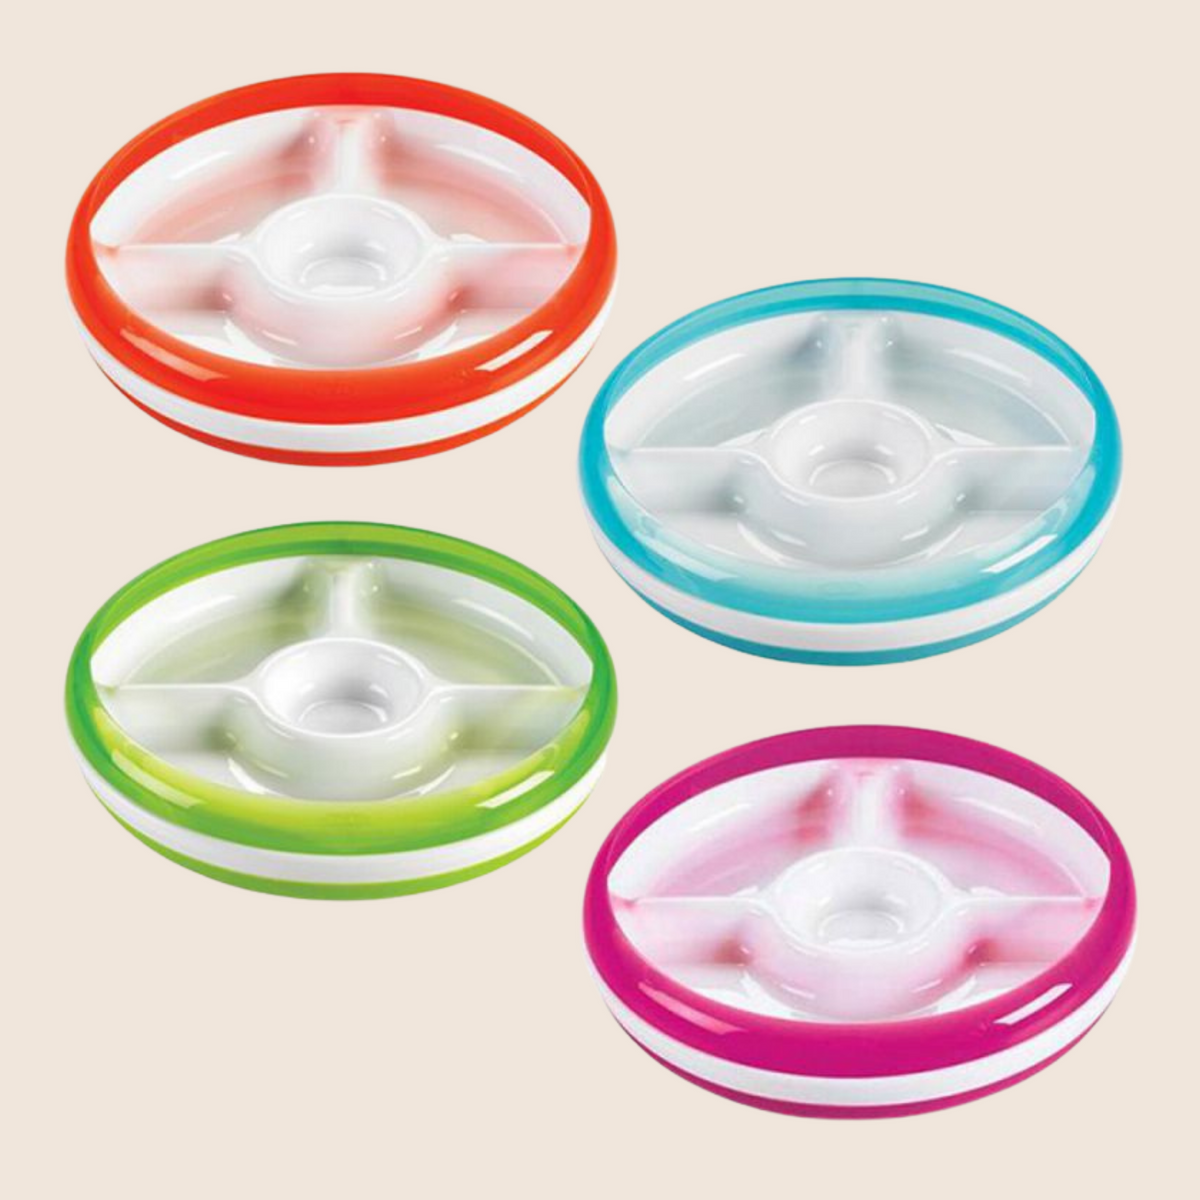 OXO TOT SILICONE DIVIDED PLATE PINK